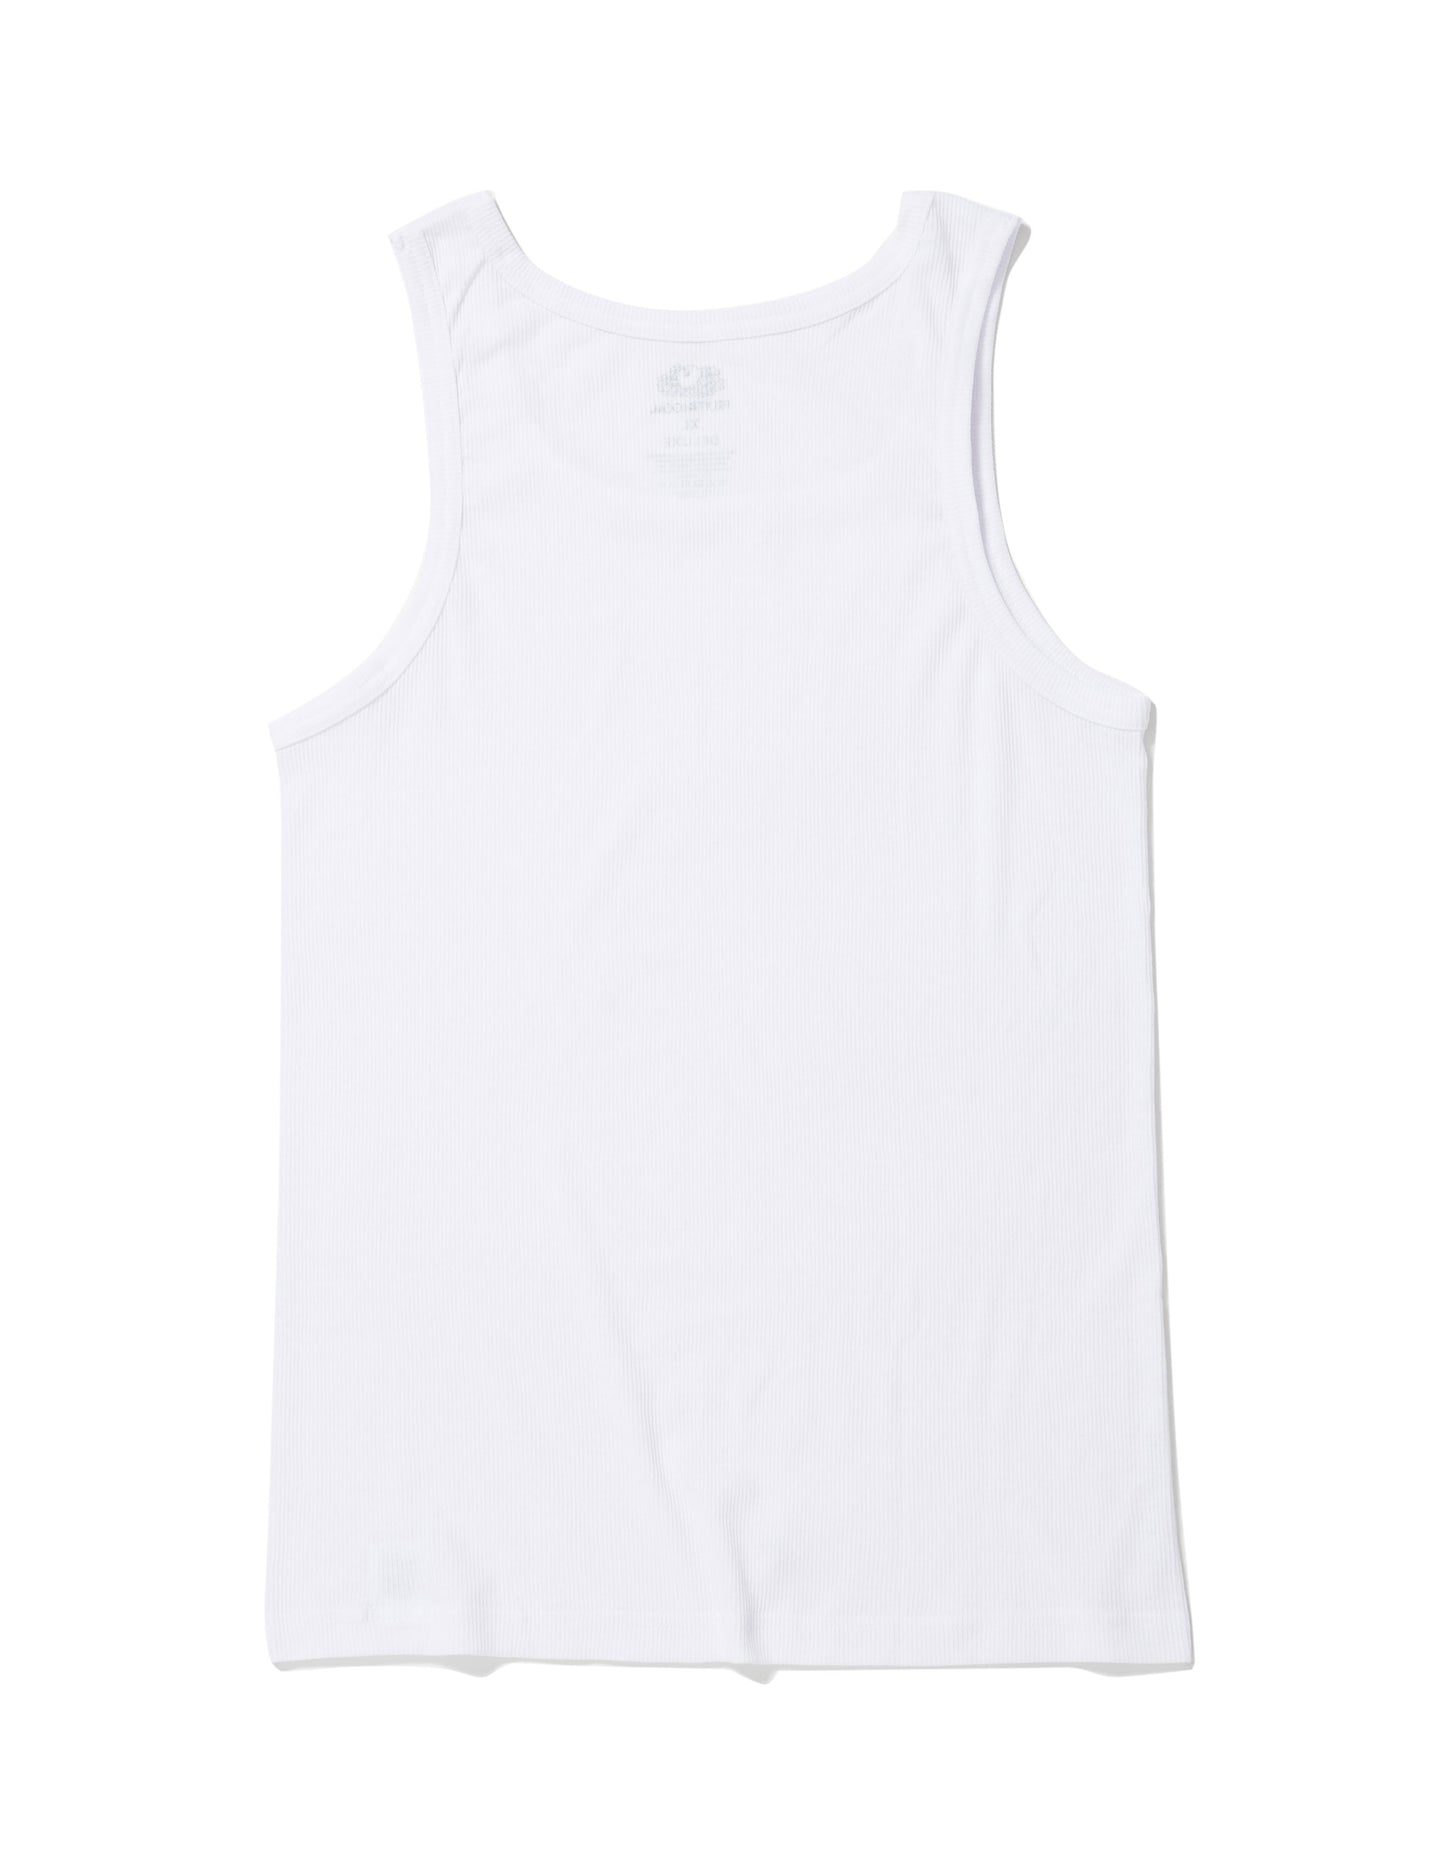 DELUXE x FRUIT OF THE LOOM PACK TANK WHITE